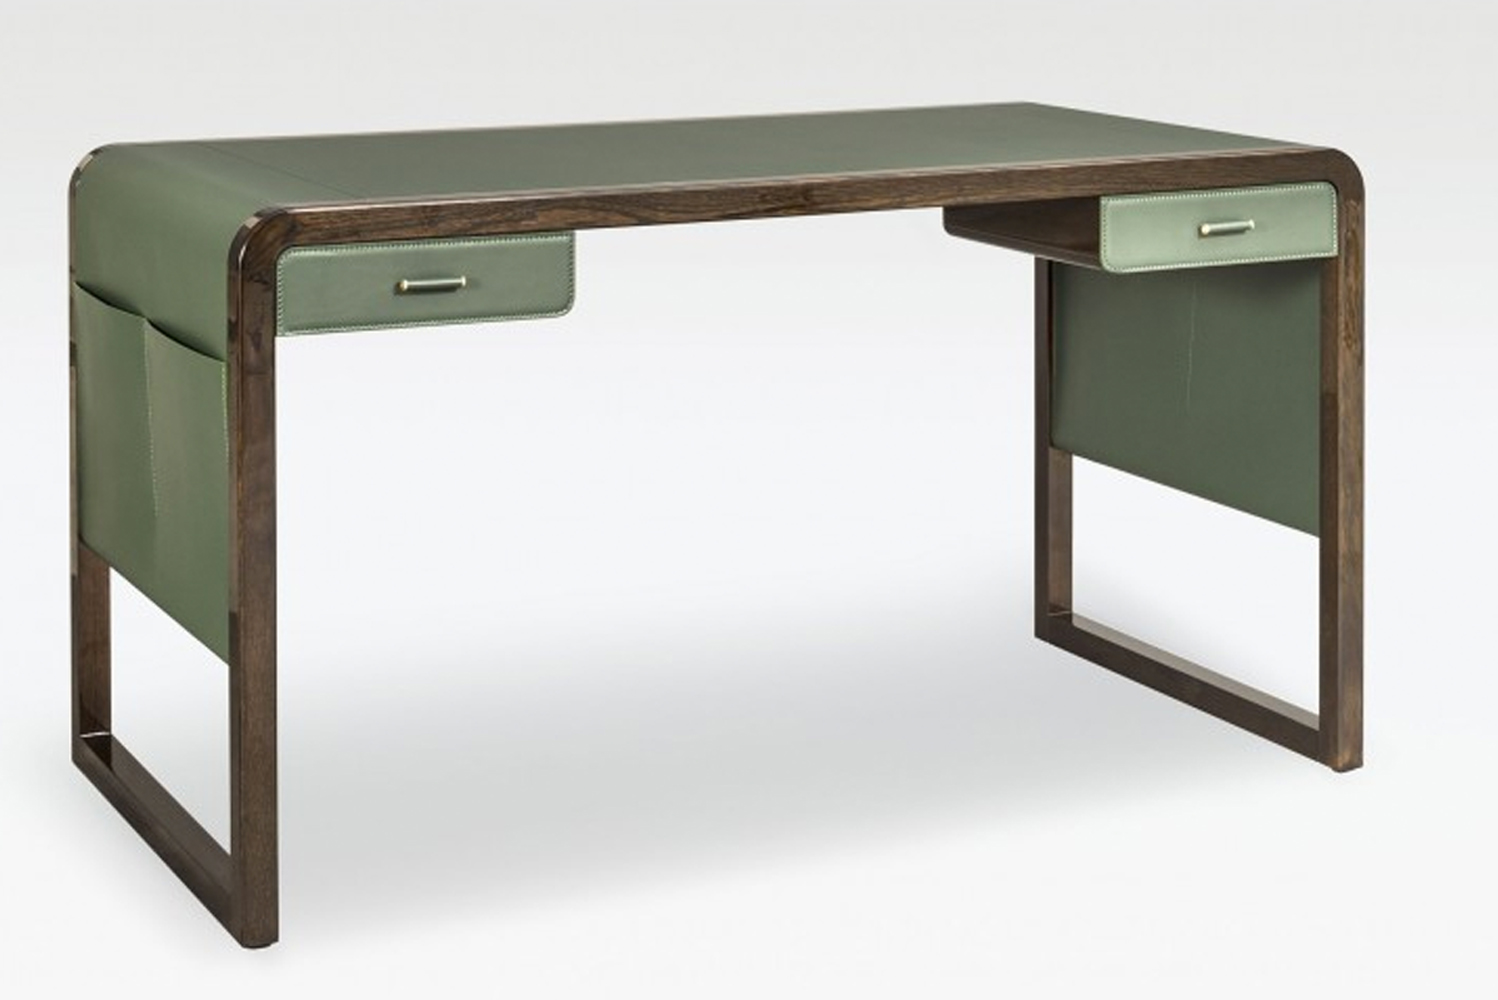 Fashioned of dark elm wood and green leather Jolie has two drawers as well as leather pockets on both sides 